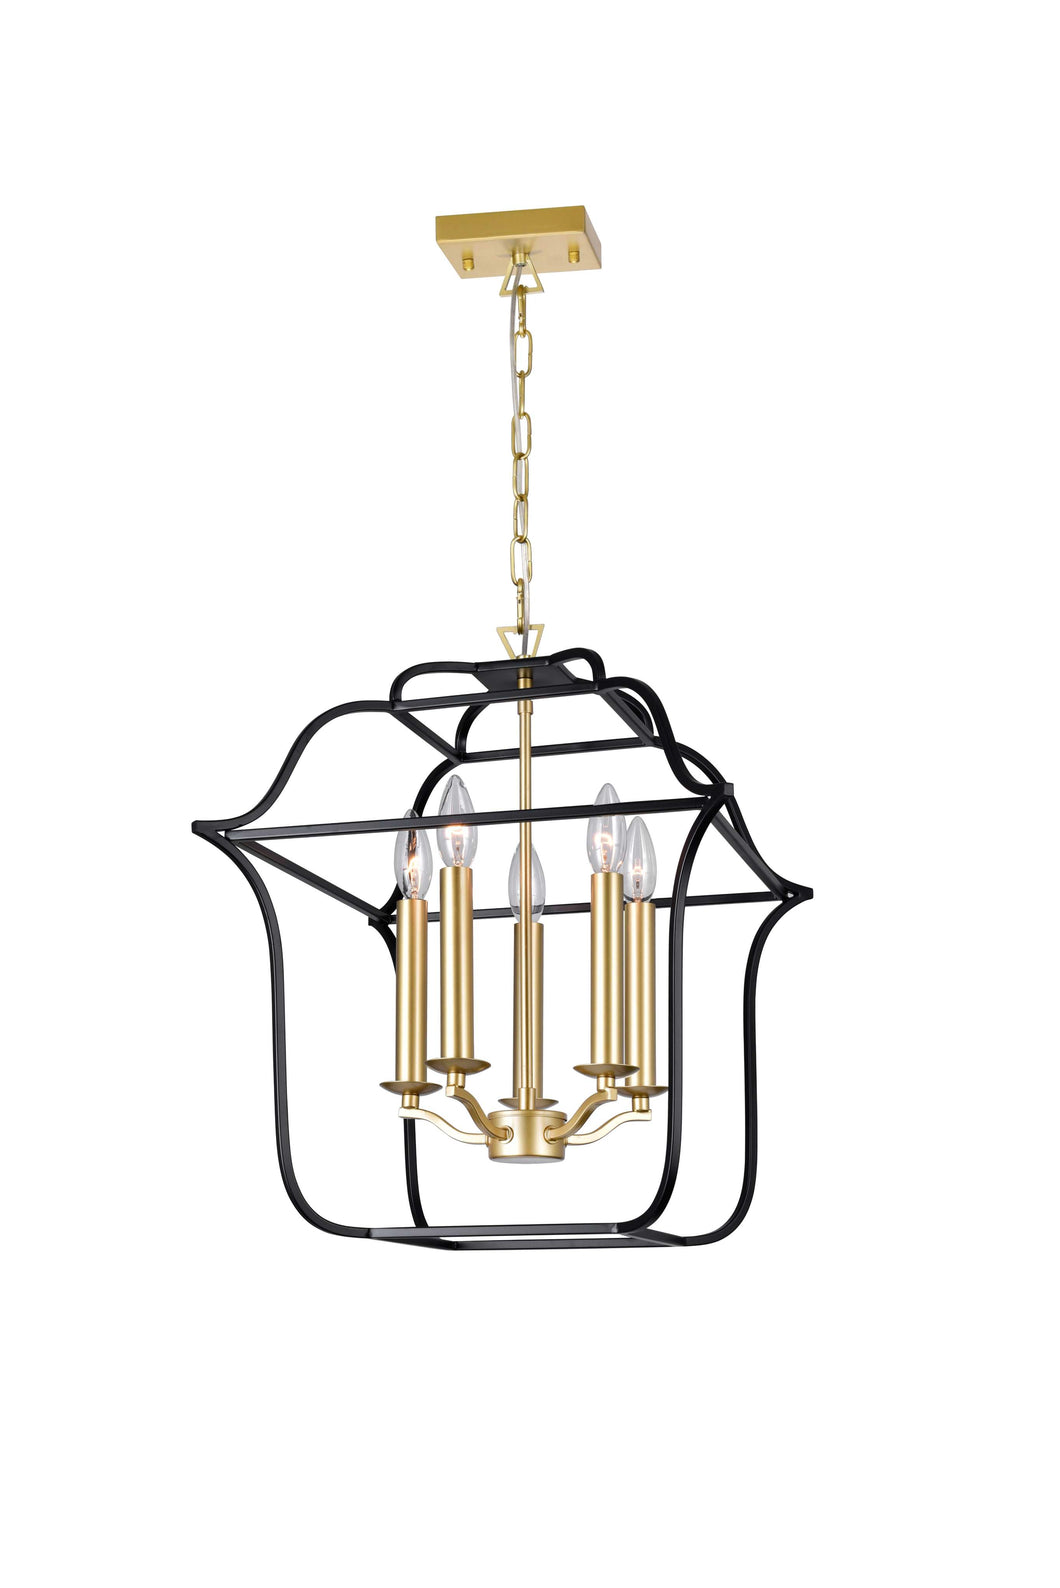 5 Light Chandelier with Satin Gold & Black Finish